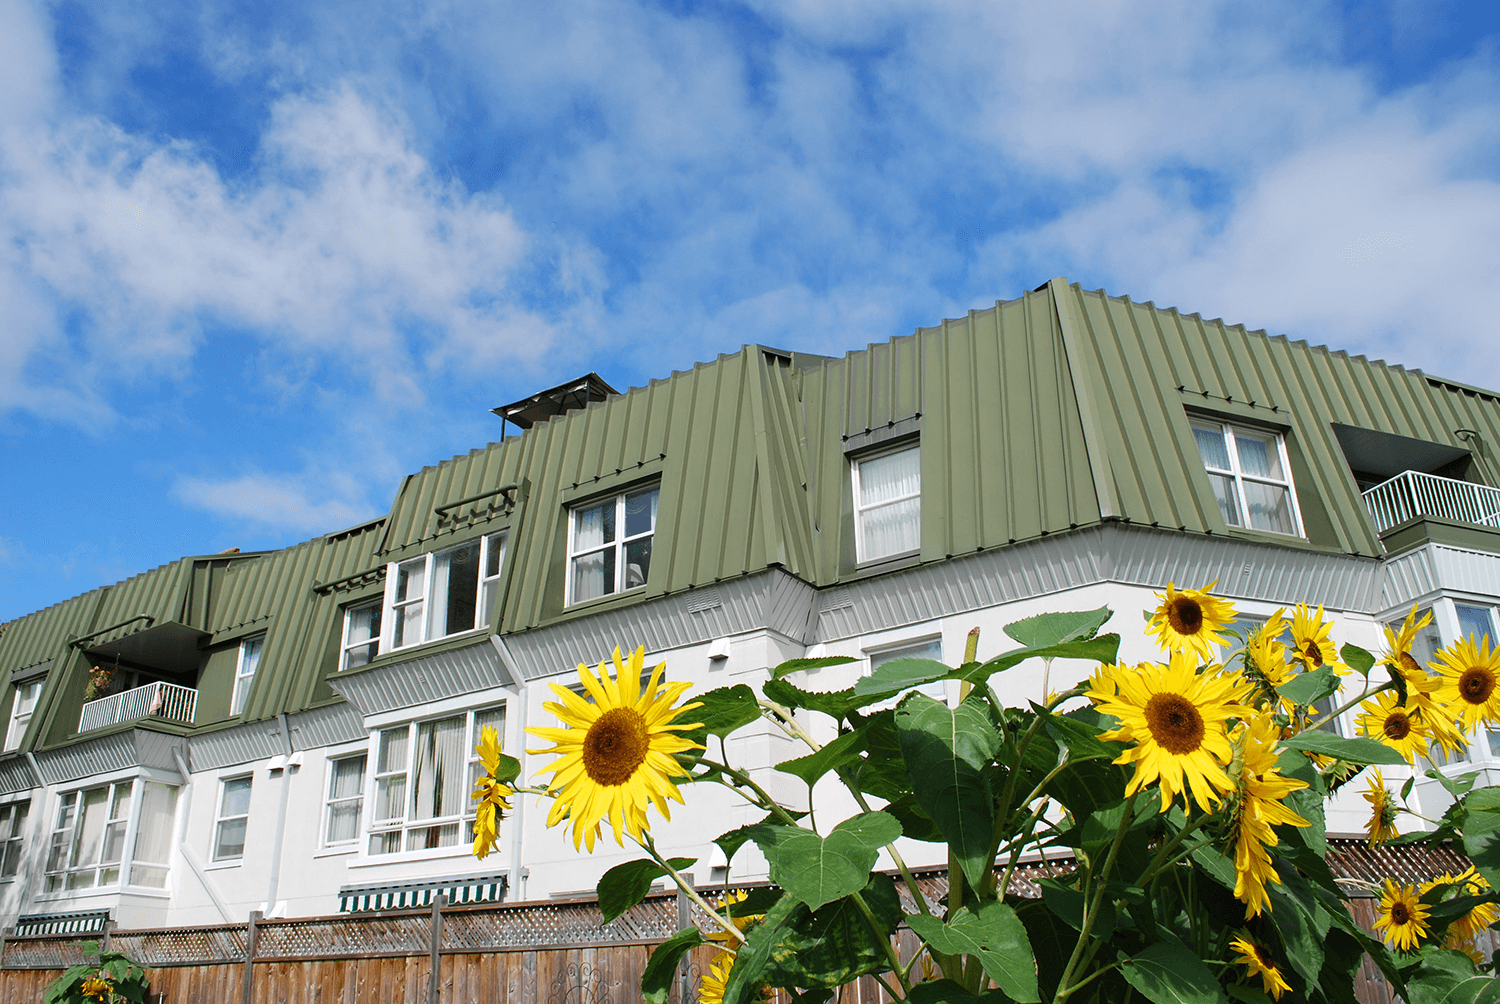 View of Wyndham Gardens building with sunflower in foreground